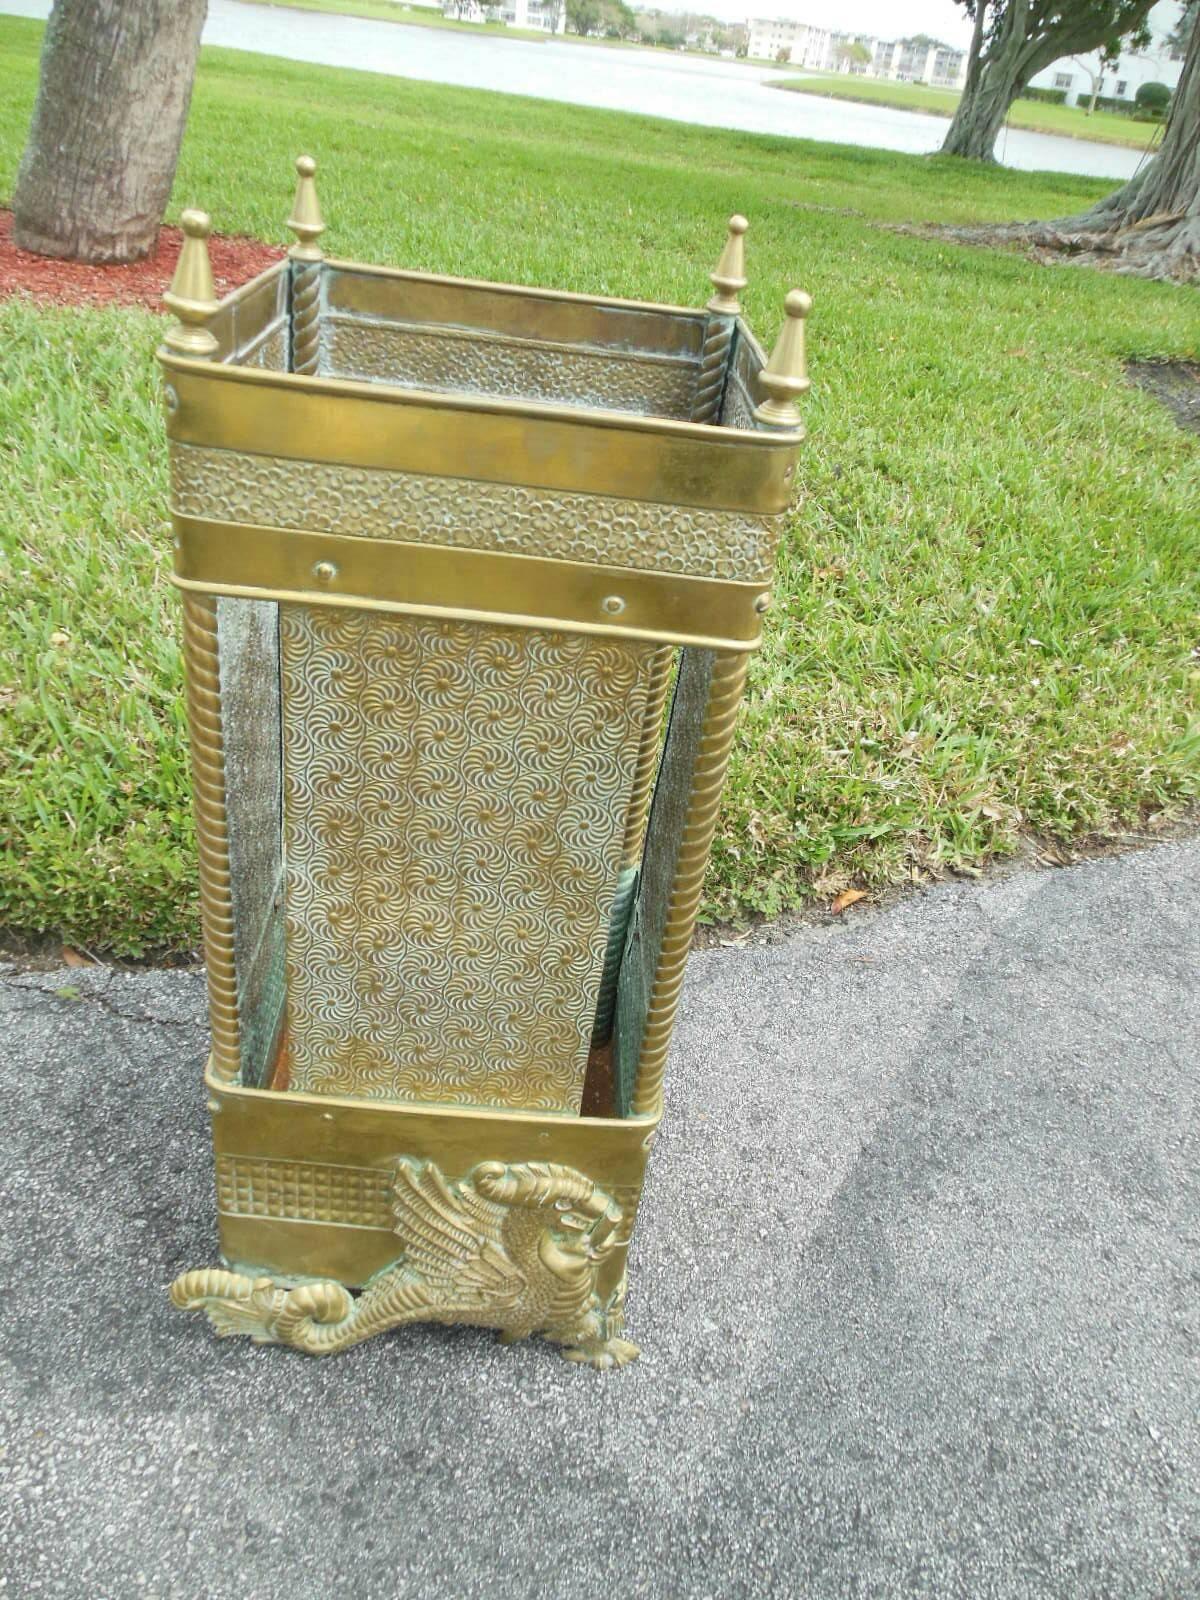 An American aesthetic movement brass umbrella stand. The brass stand with 
two different embossed aesthetic designs. Two sides have a mythological dragon/griffin, the two other sides are plain. Probably polished by a previous owner 20 years or so